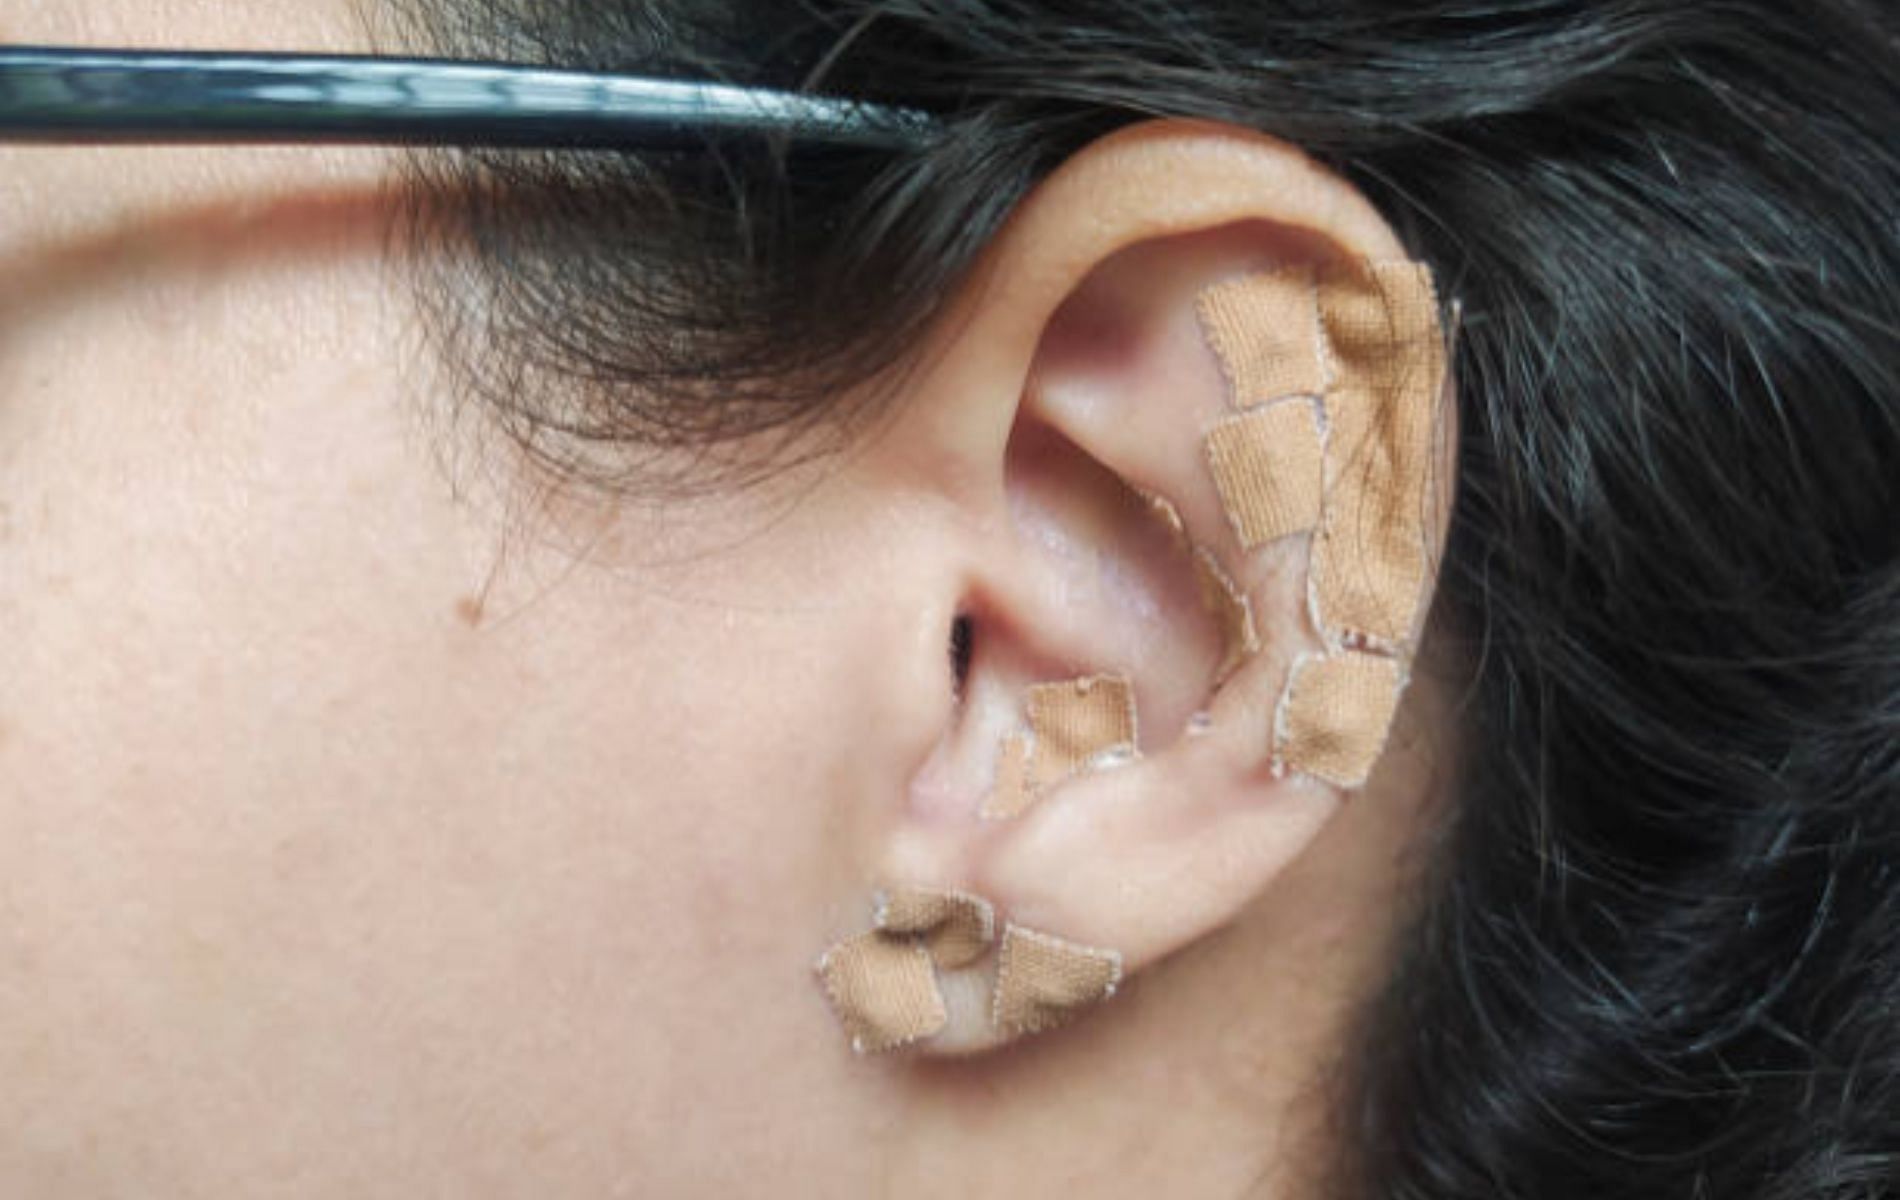 Ear seeds are tiny seeds of the Vaccaria plant contained in latex stickers. (Image by iStockphoto)